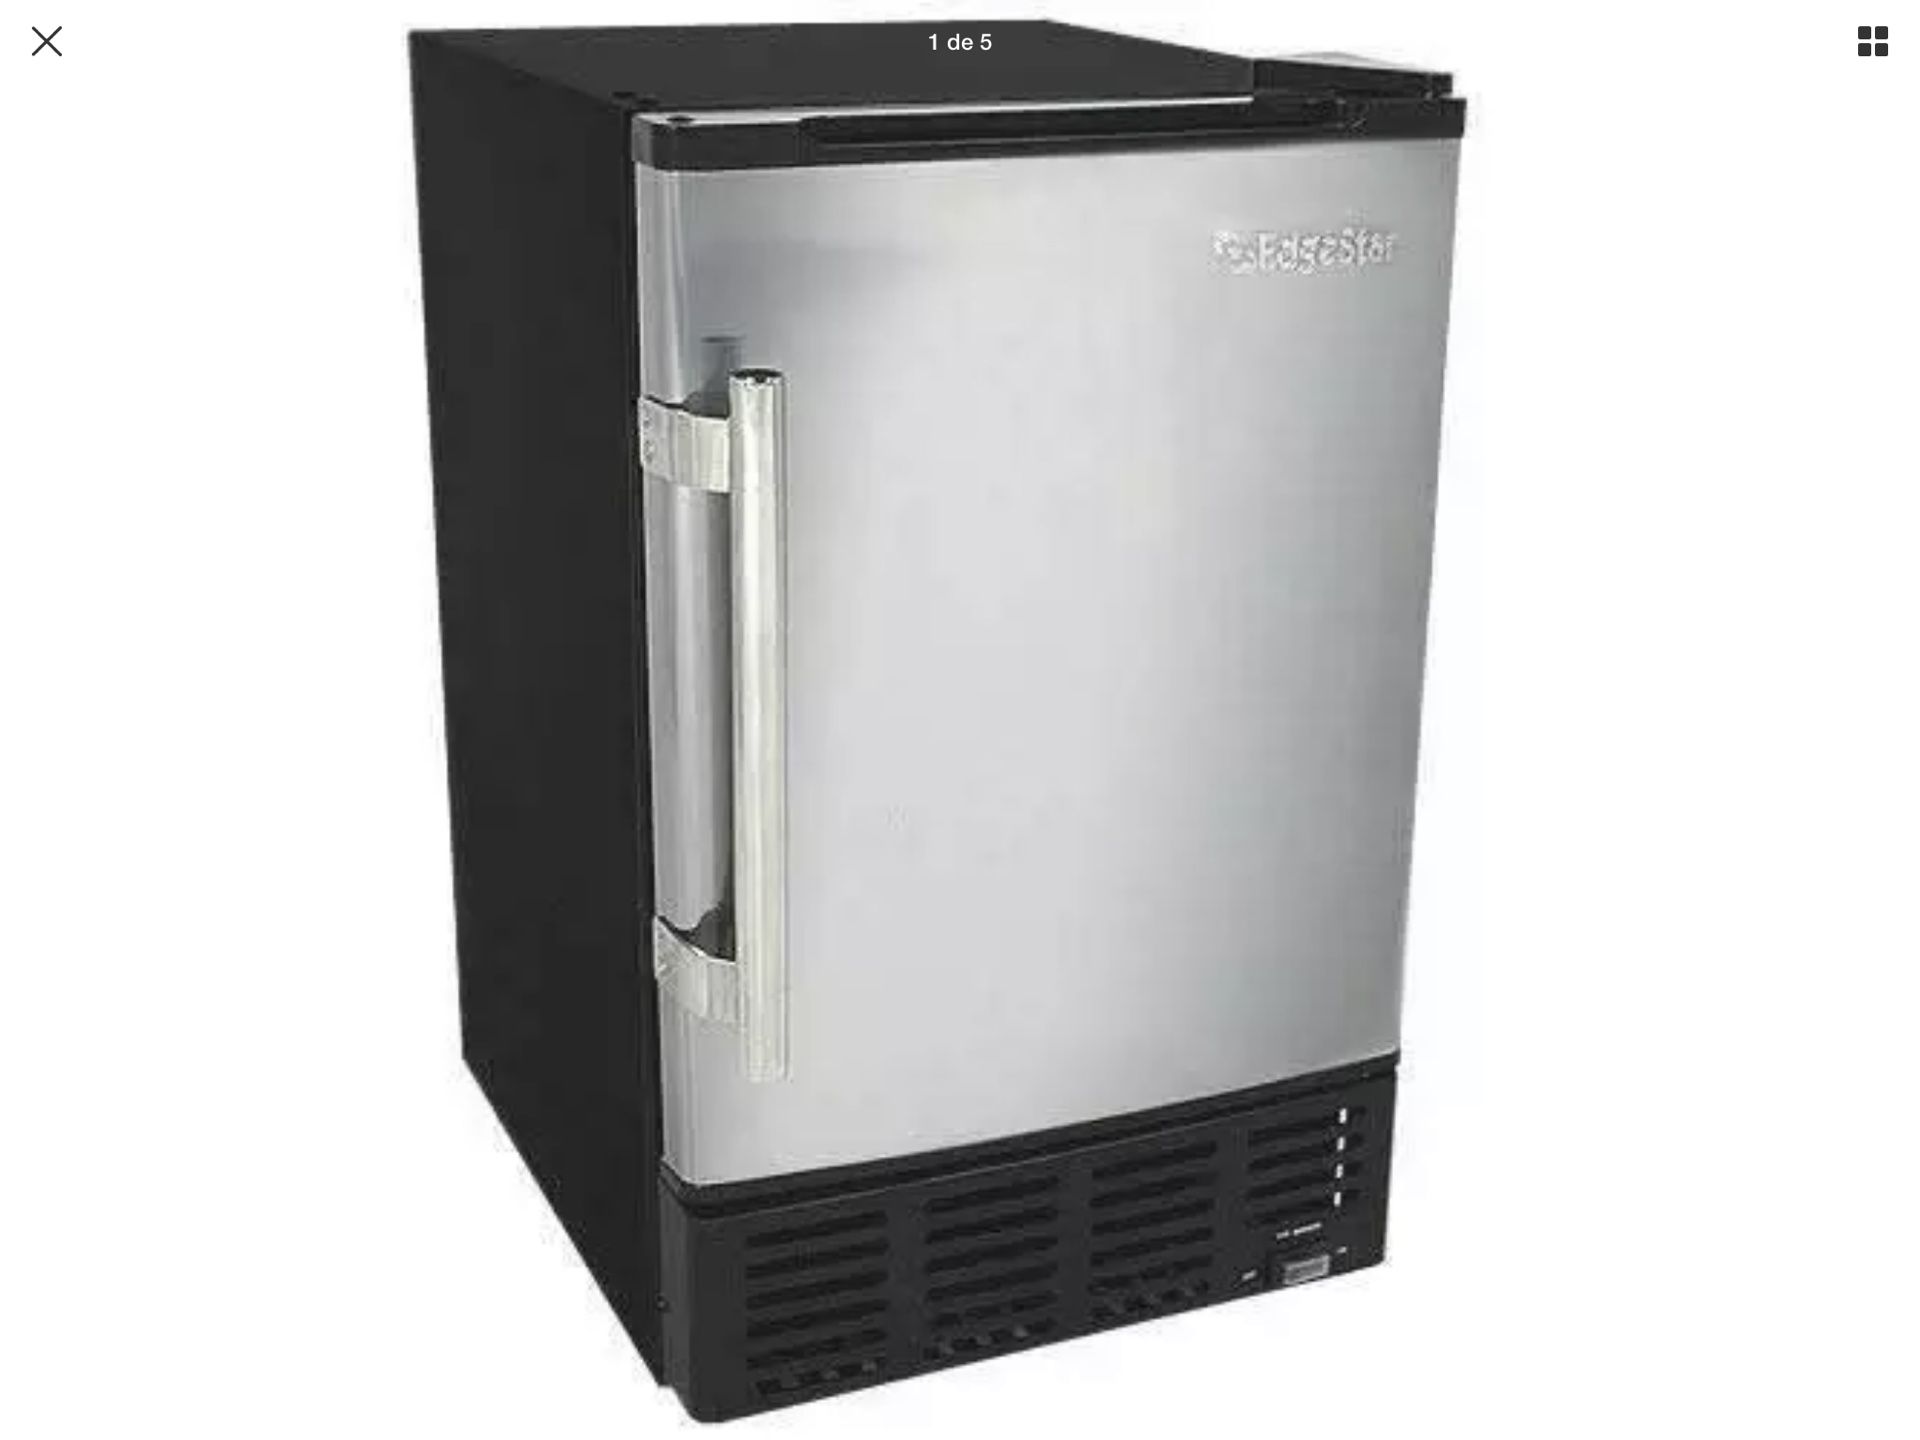 EdgeStar Ice Maker , IB120 15 Inch Wide 6 Lbs. Capacity Built-In Ice Maker with 12 Lbs. Dail $105 , open box never used Stock pictures